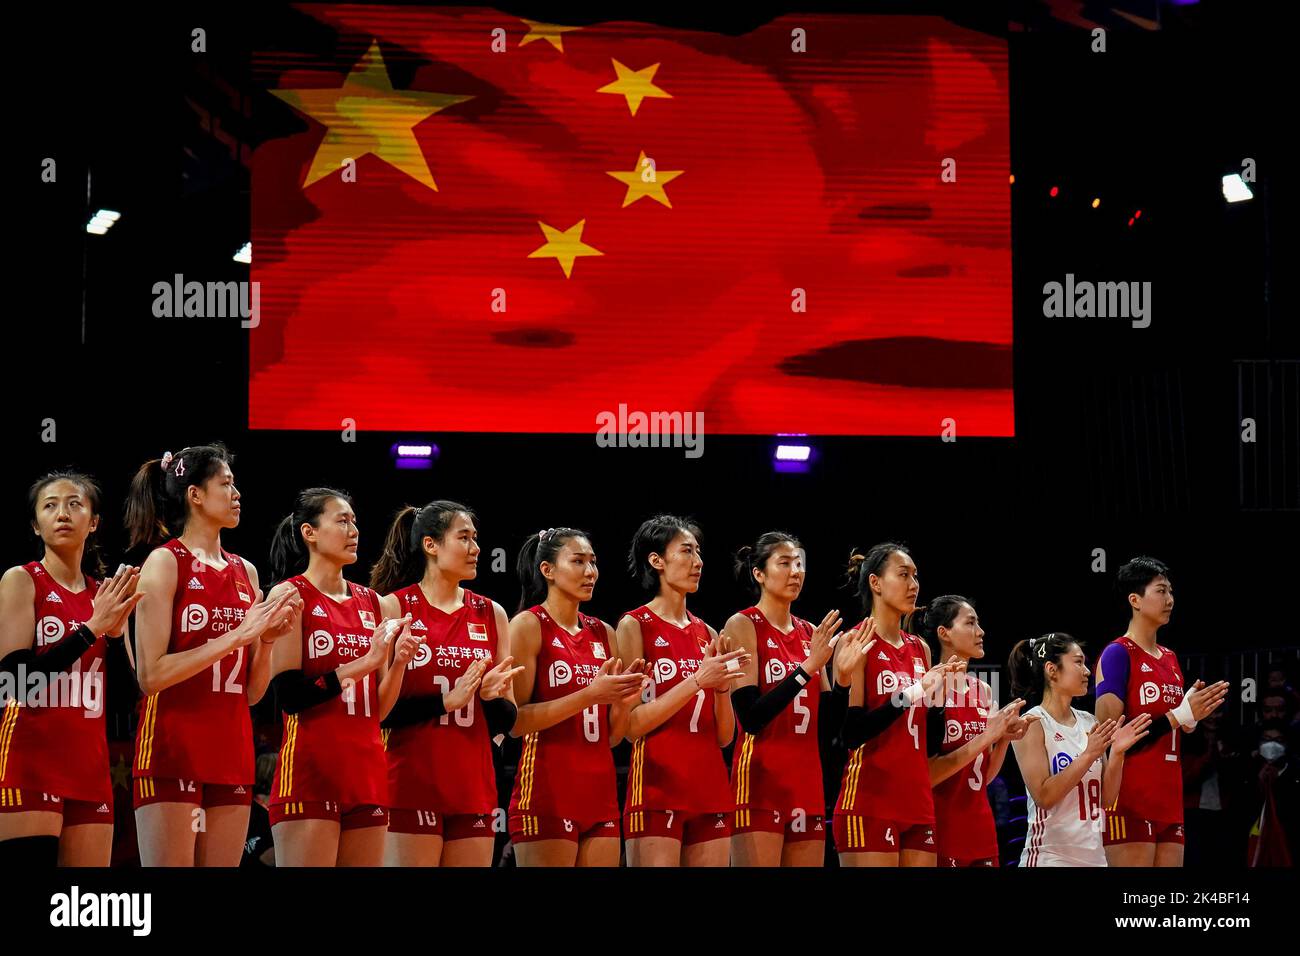 ARNHEM, NETHERLANDS - SEPTEMBER 25: Xia Ding of China, Yingying Li of China, Yizhu Wang of China, Yunlu Wang of China, Ye Jin of China, Yuanyuan Wang of China, Yi Gao of China, Hanyu Yang of China, Linyu Diao of China, Mengjie Wang of China and Xinyue Yuan of China line up for the national anthem during the Pool D Phase 1 match between China and Argentina on Day 3 of the FIVB Volleyball Womens World Championship 2022 at the Gelredome on September 25, 2022 in Arnhem, Netherlands (Photo by Rene Nijhuis/Orange Pictures) Stock Photo